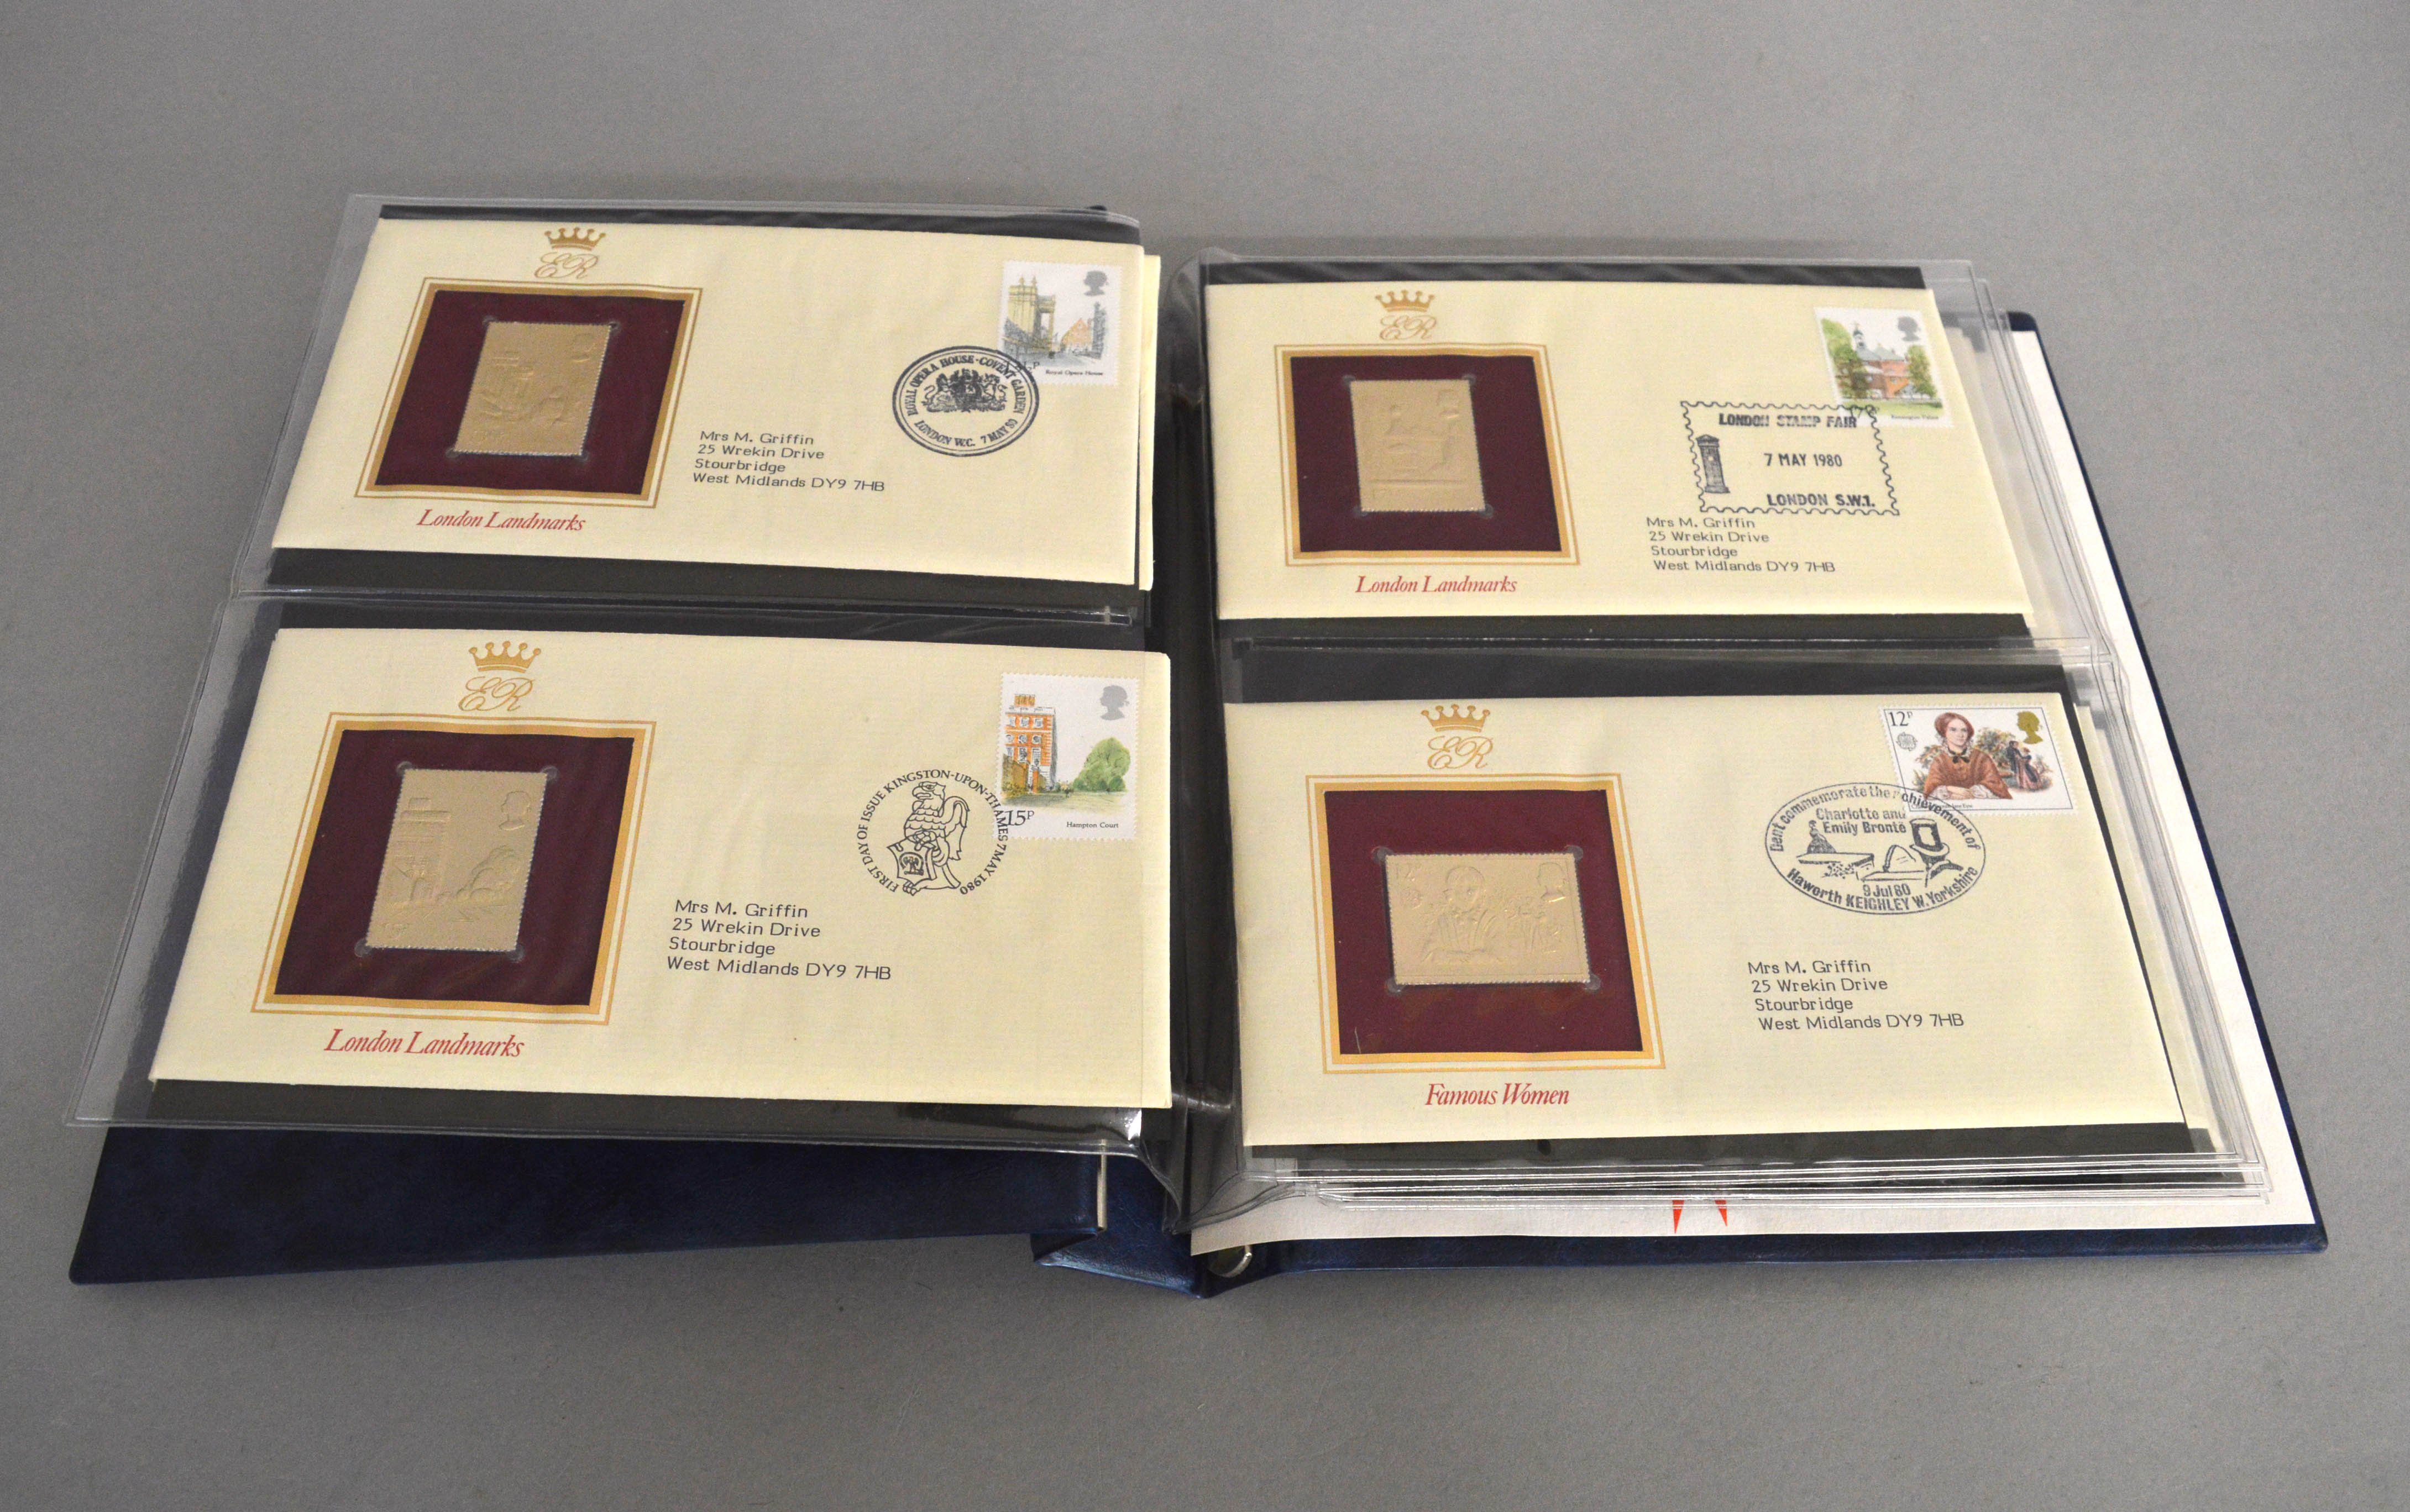 A folder of 18 replicas of British stamps with a certificate.